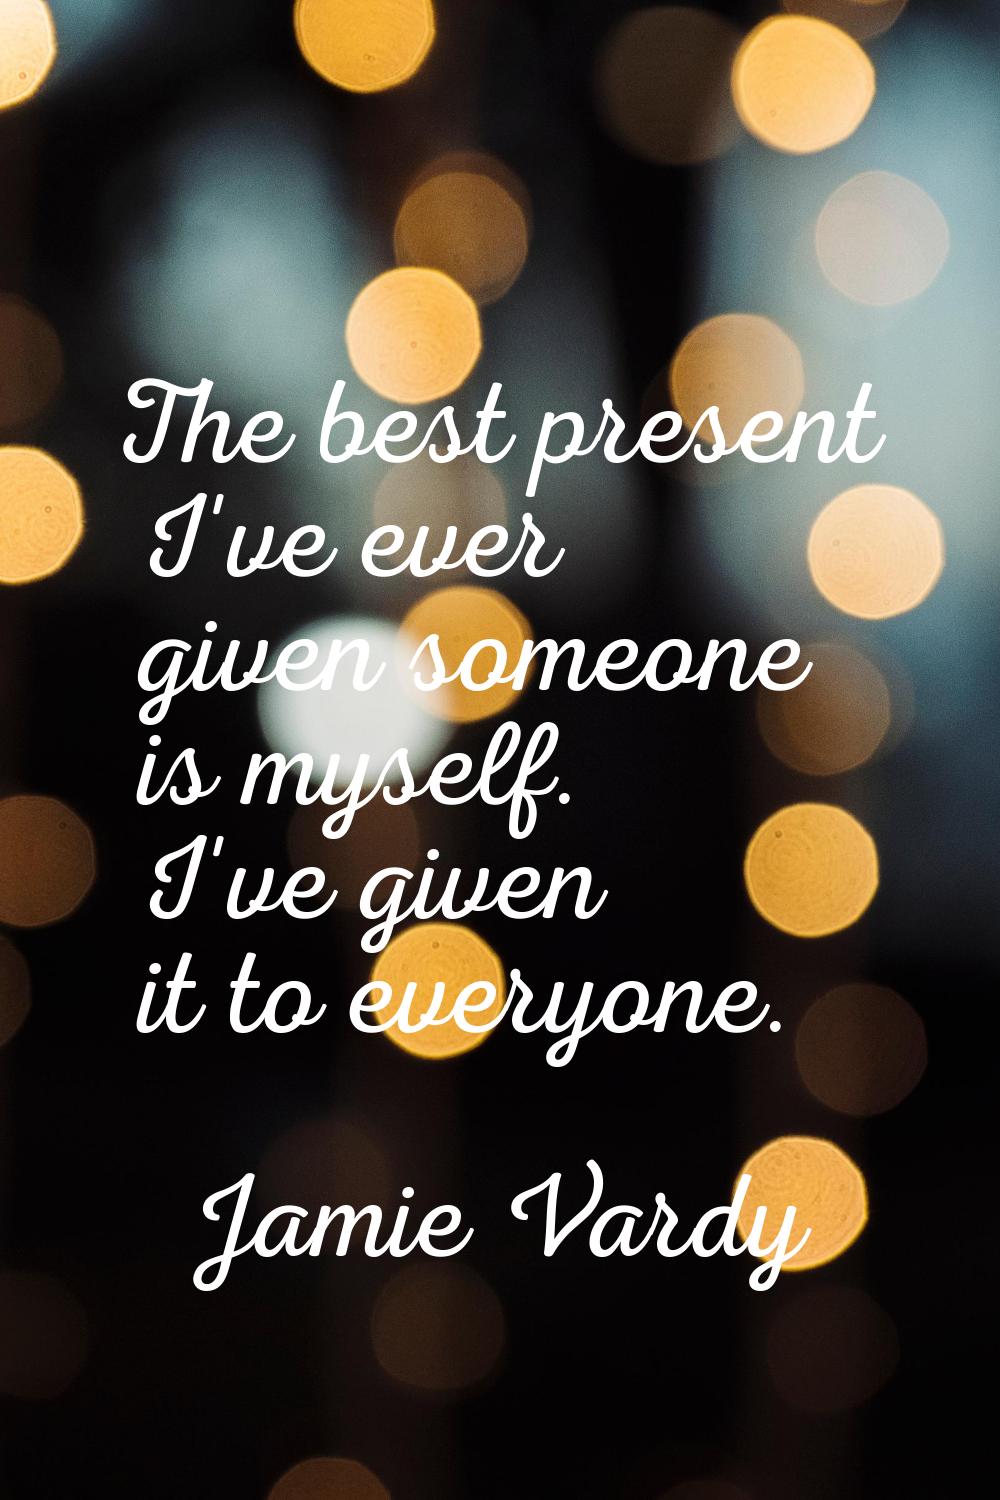 The best present I've ever given someone is myself. I've given it to everyone.